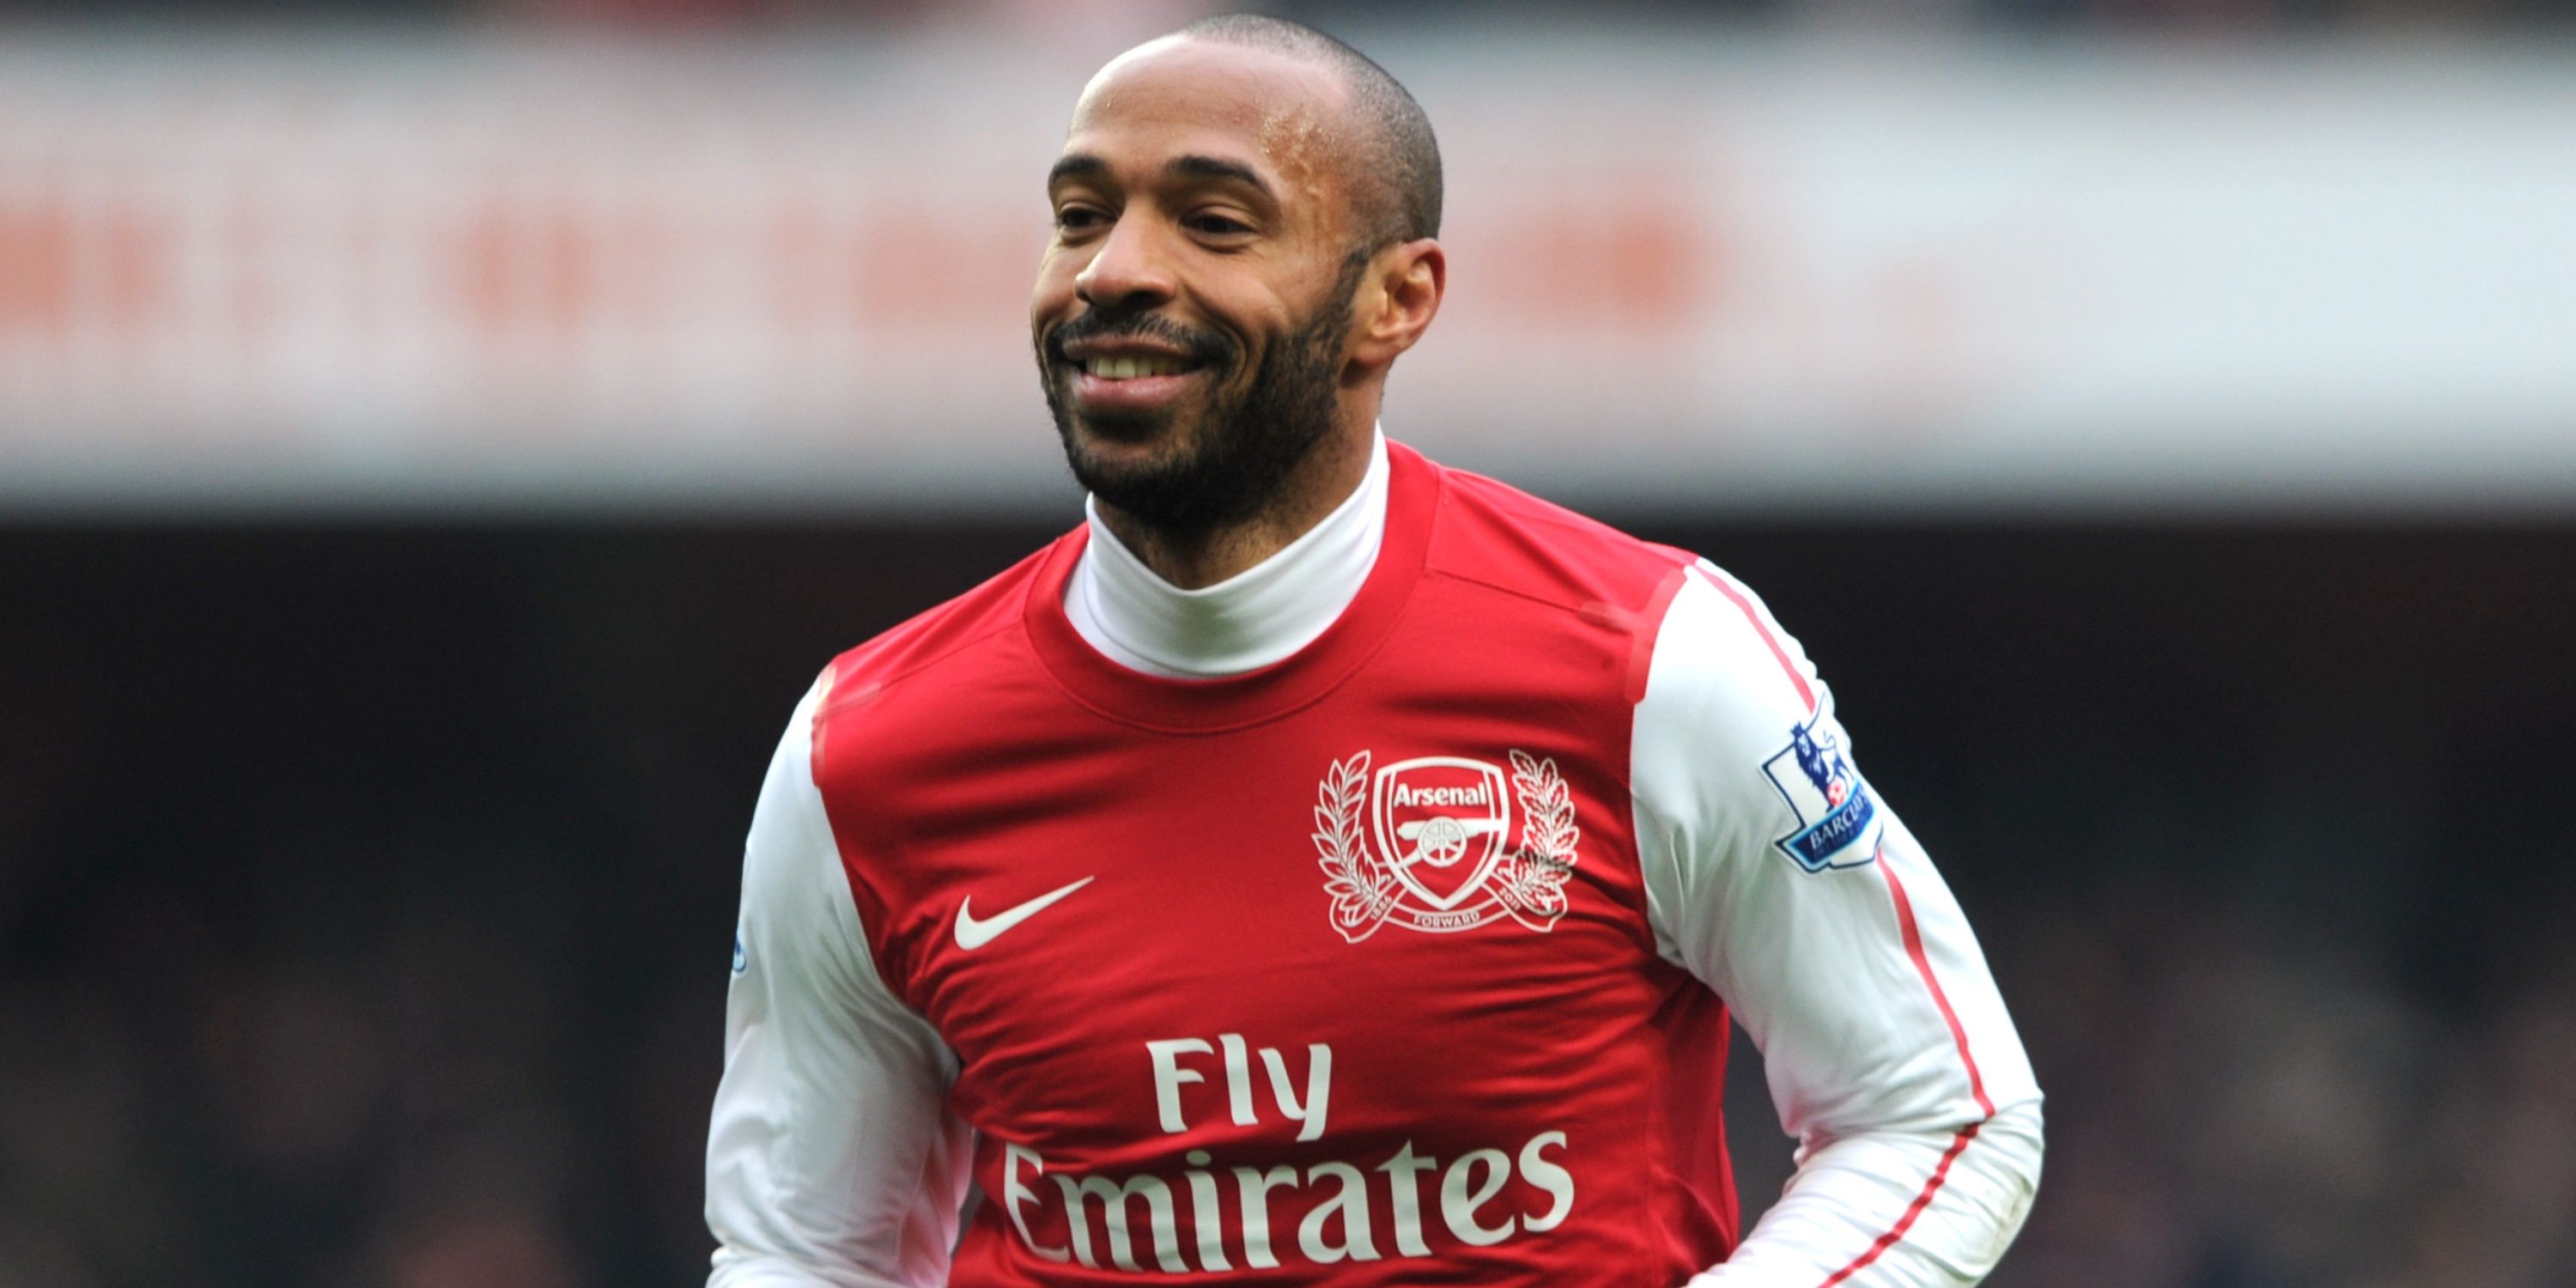 Thierry Henry of Arsenal.